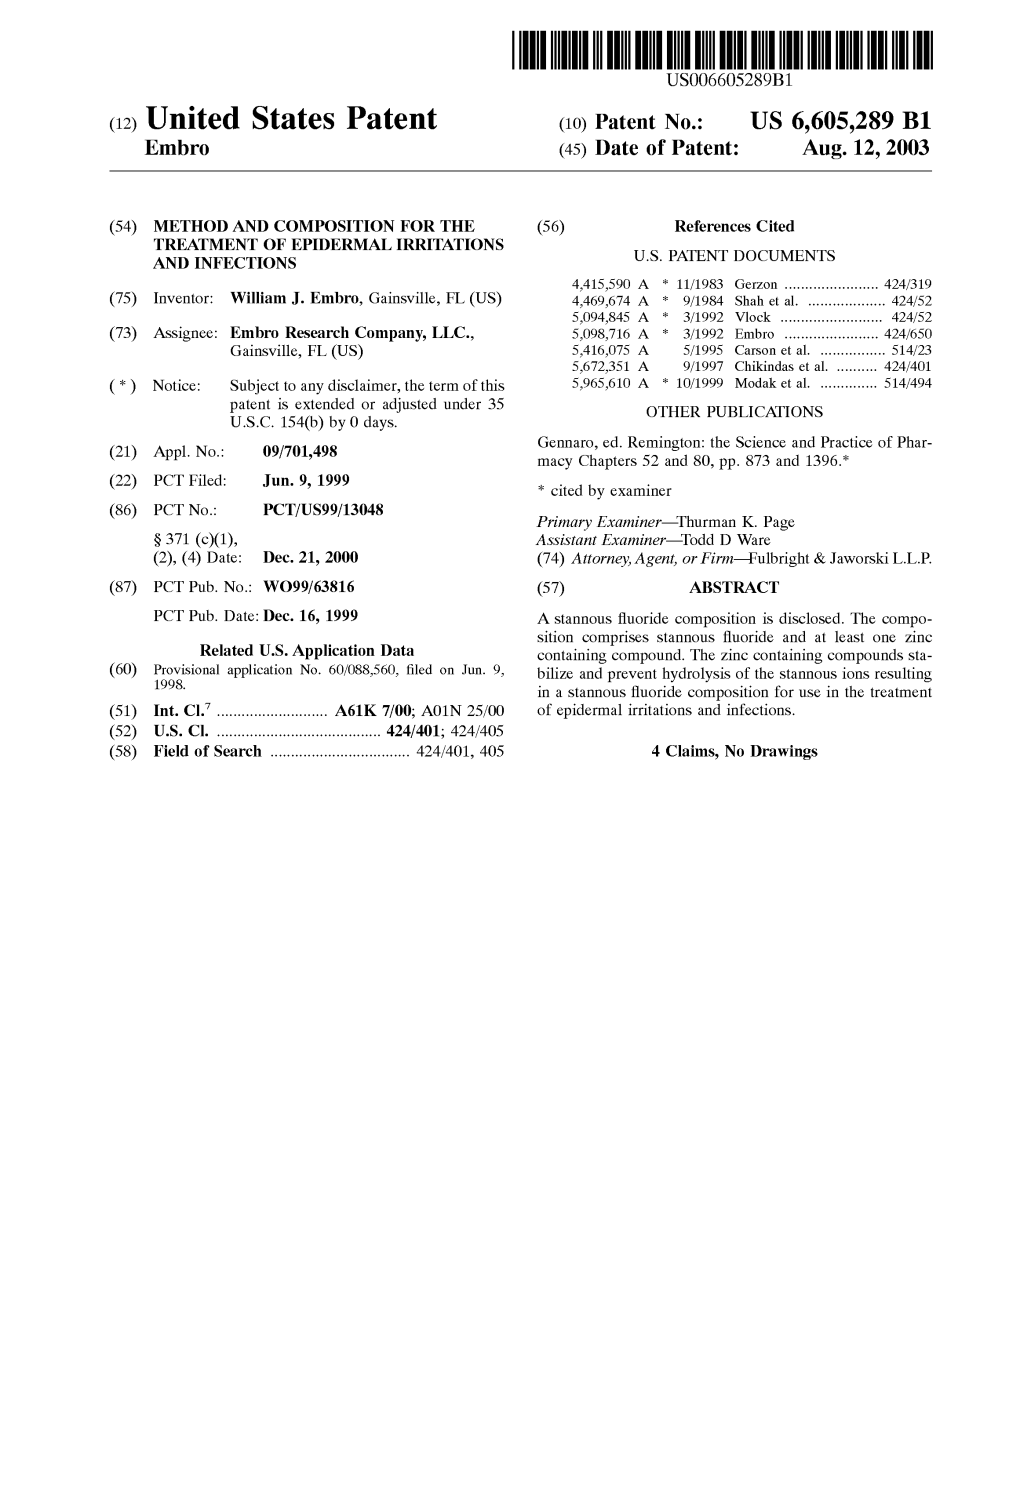 (12) United States Patent (10) Patent No.: US 6,605,289 B1 Embro (45) Date of Patent: Aug